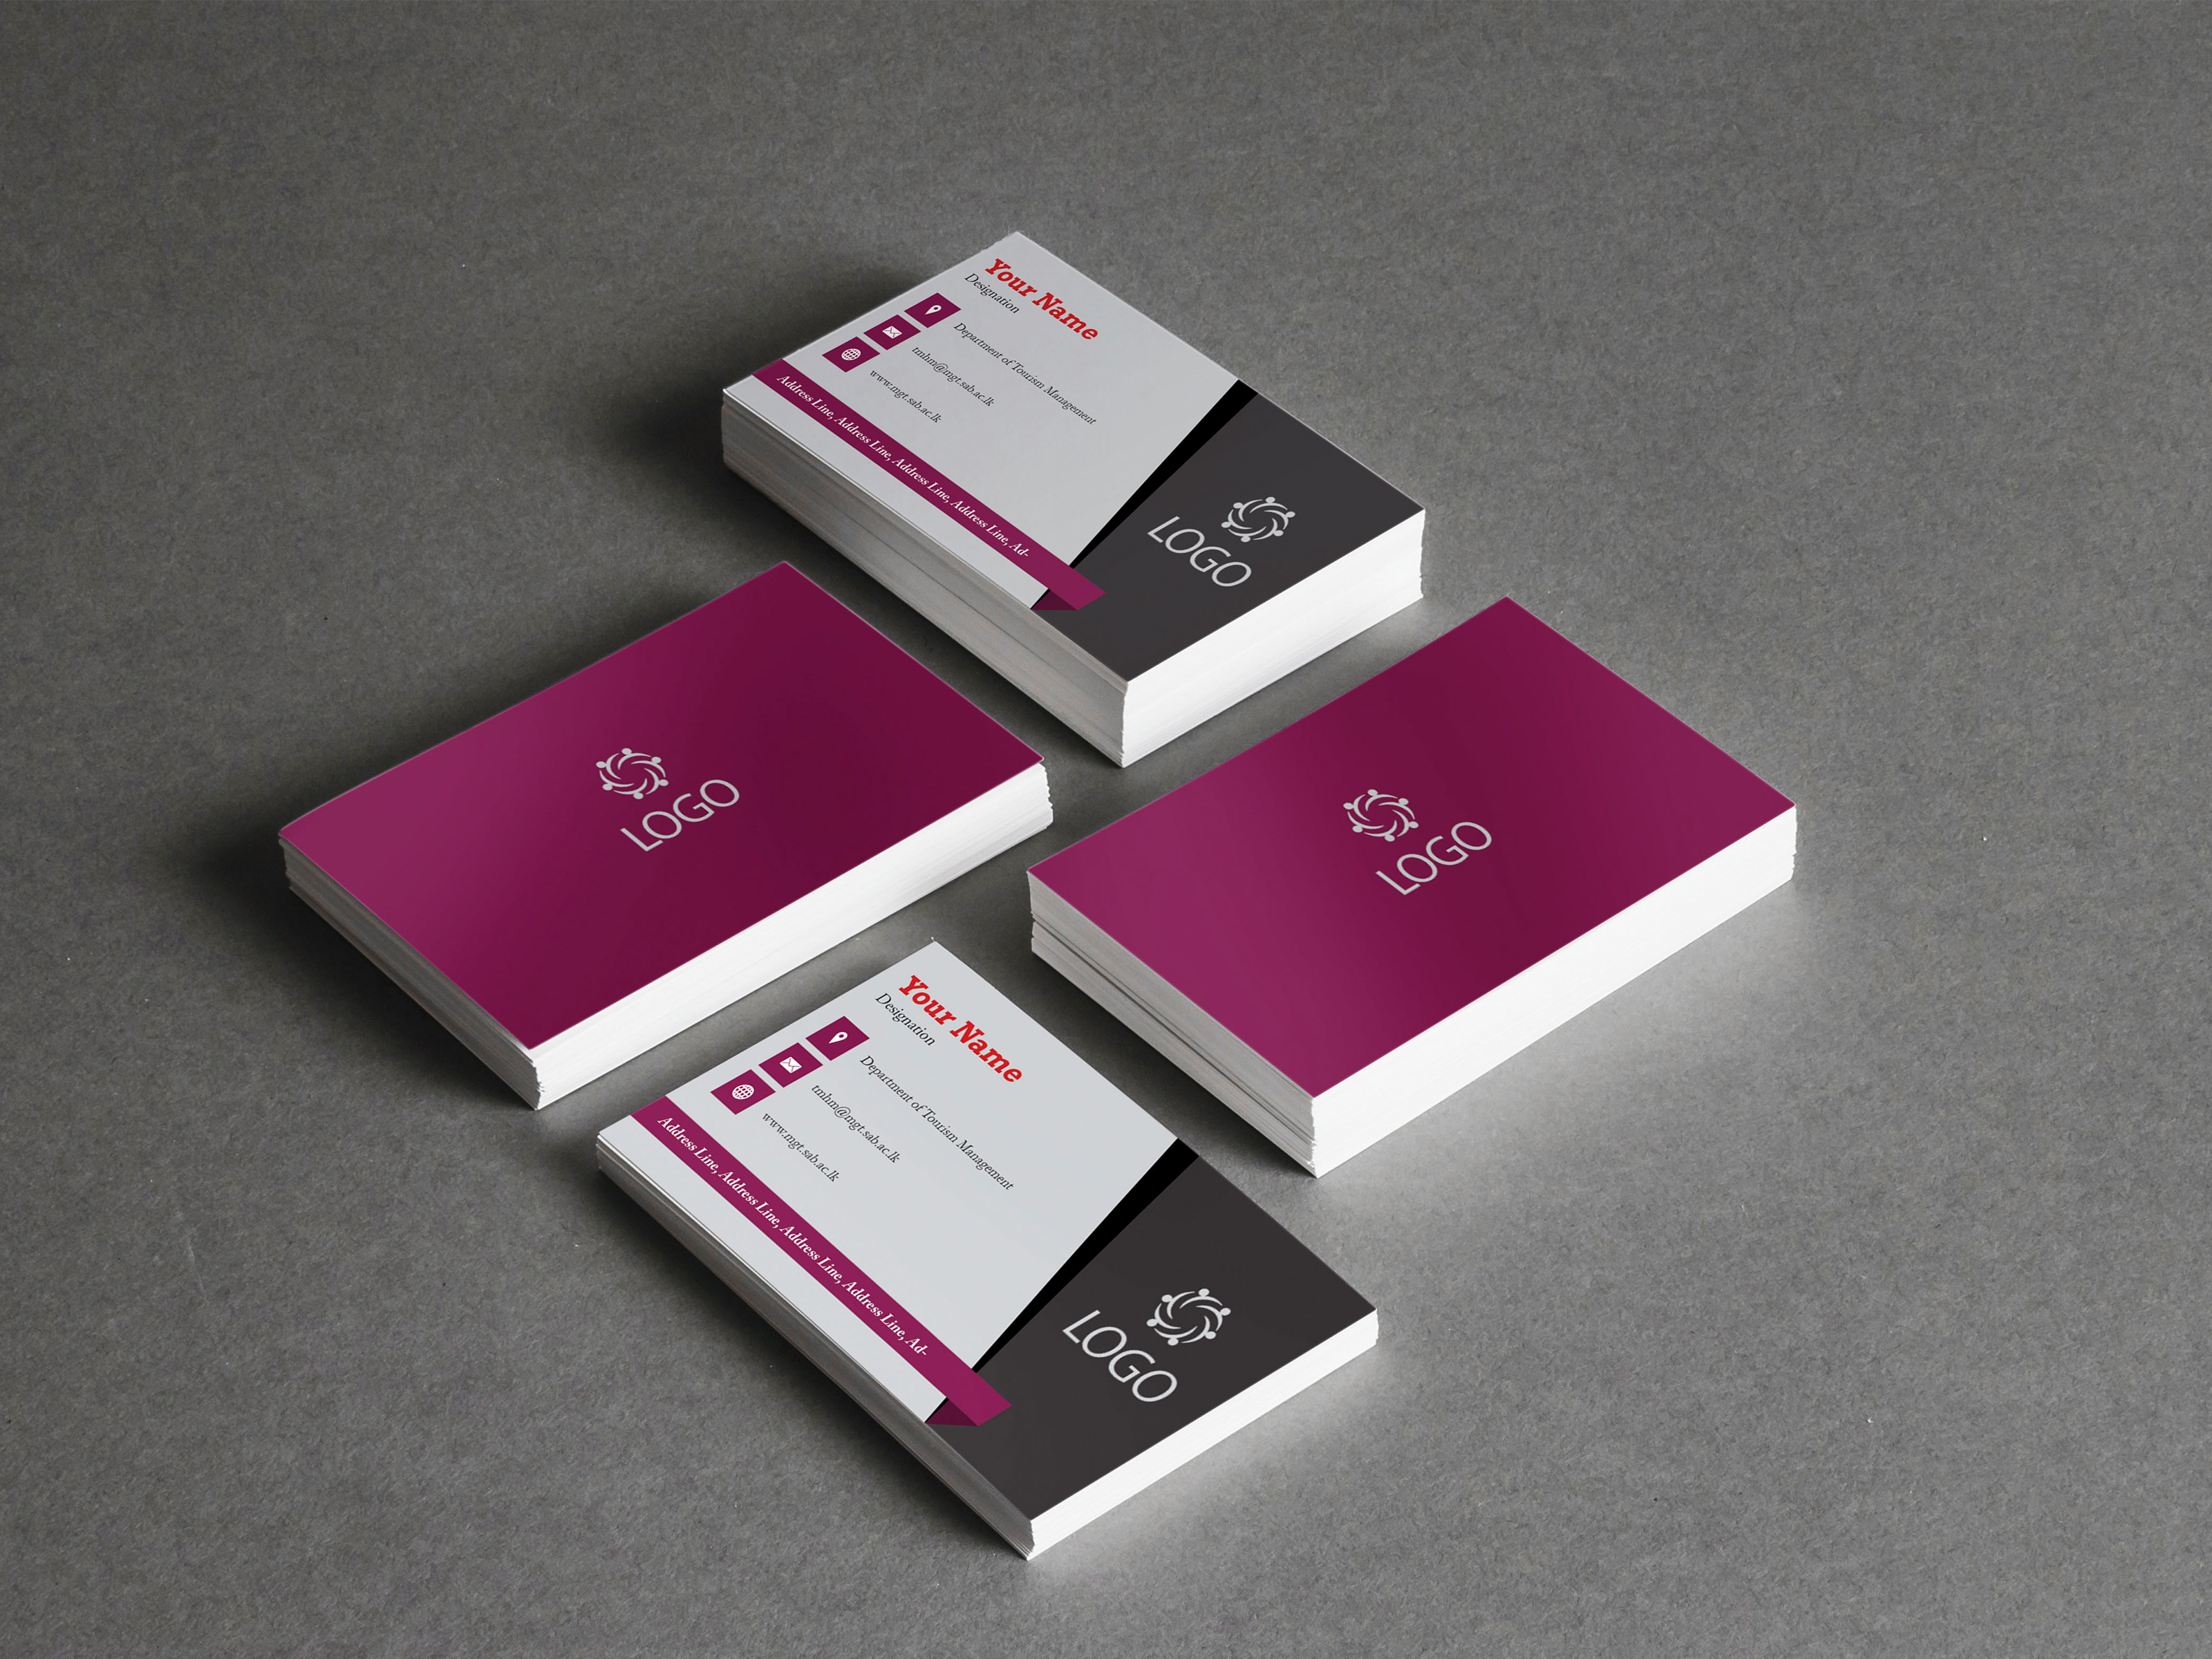 Design Creative Double Sided Business Card Or Postcards for $5 - SEOClerks